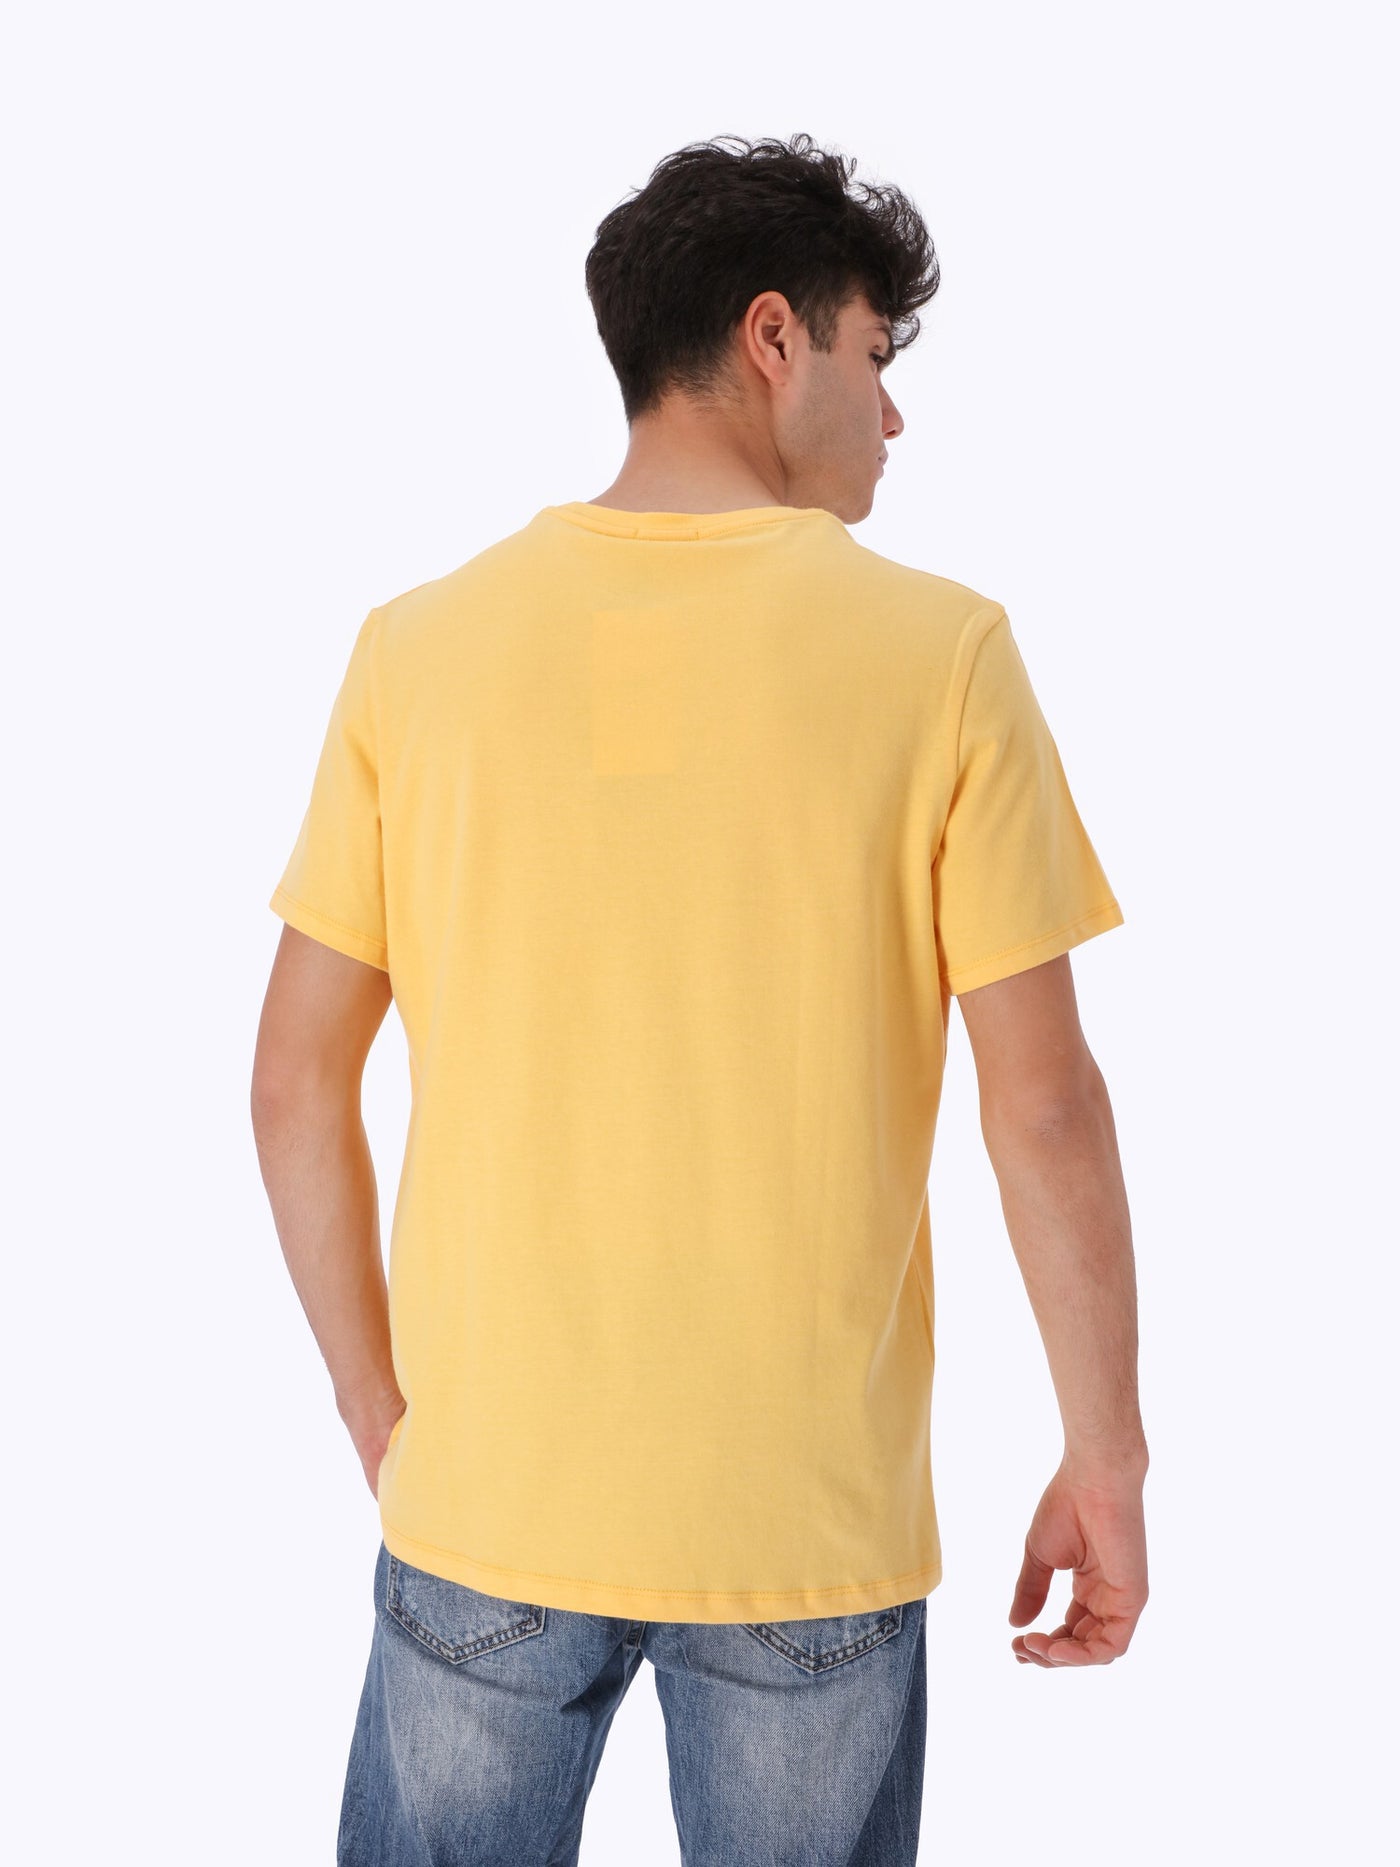 T-Shirt - Basic - Relaxed Fit